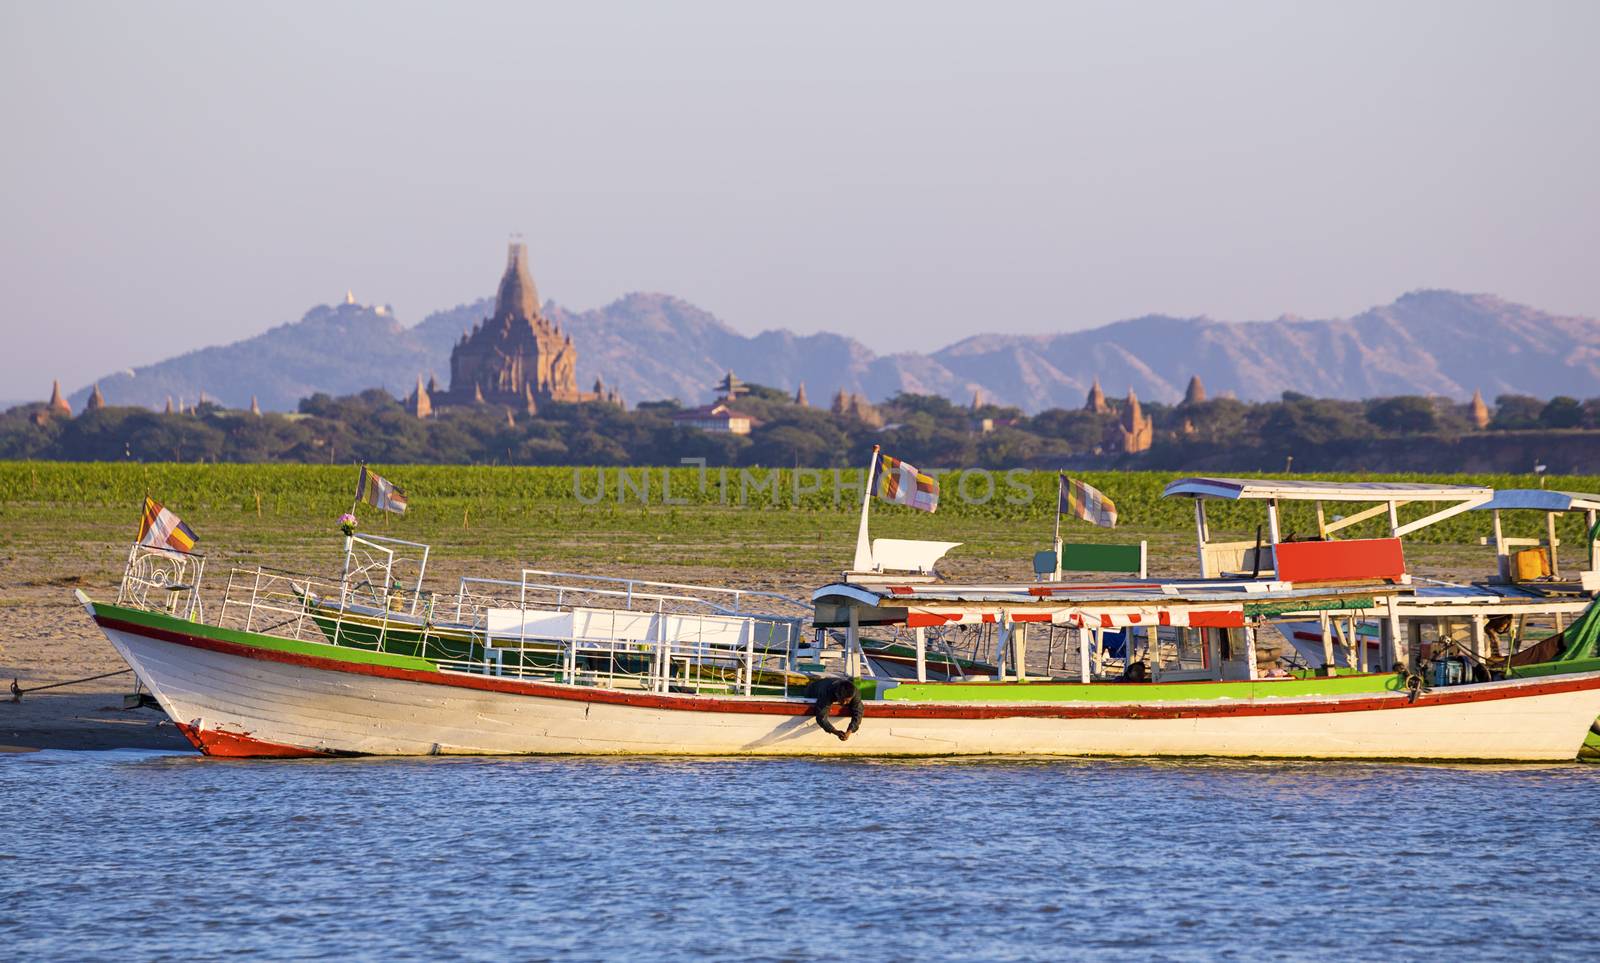 Boats and pagoda by cozyta